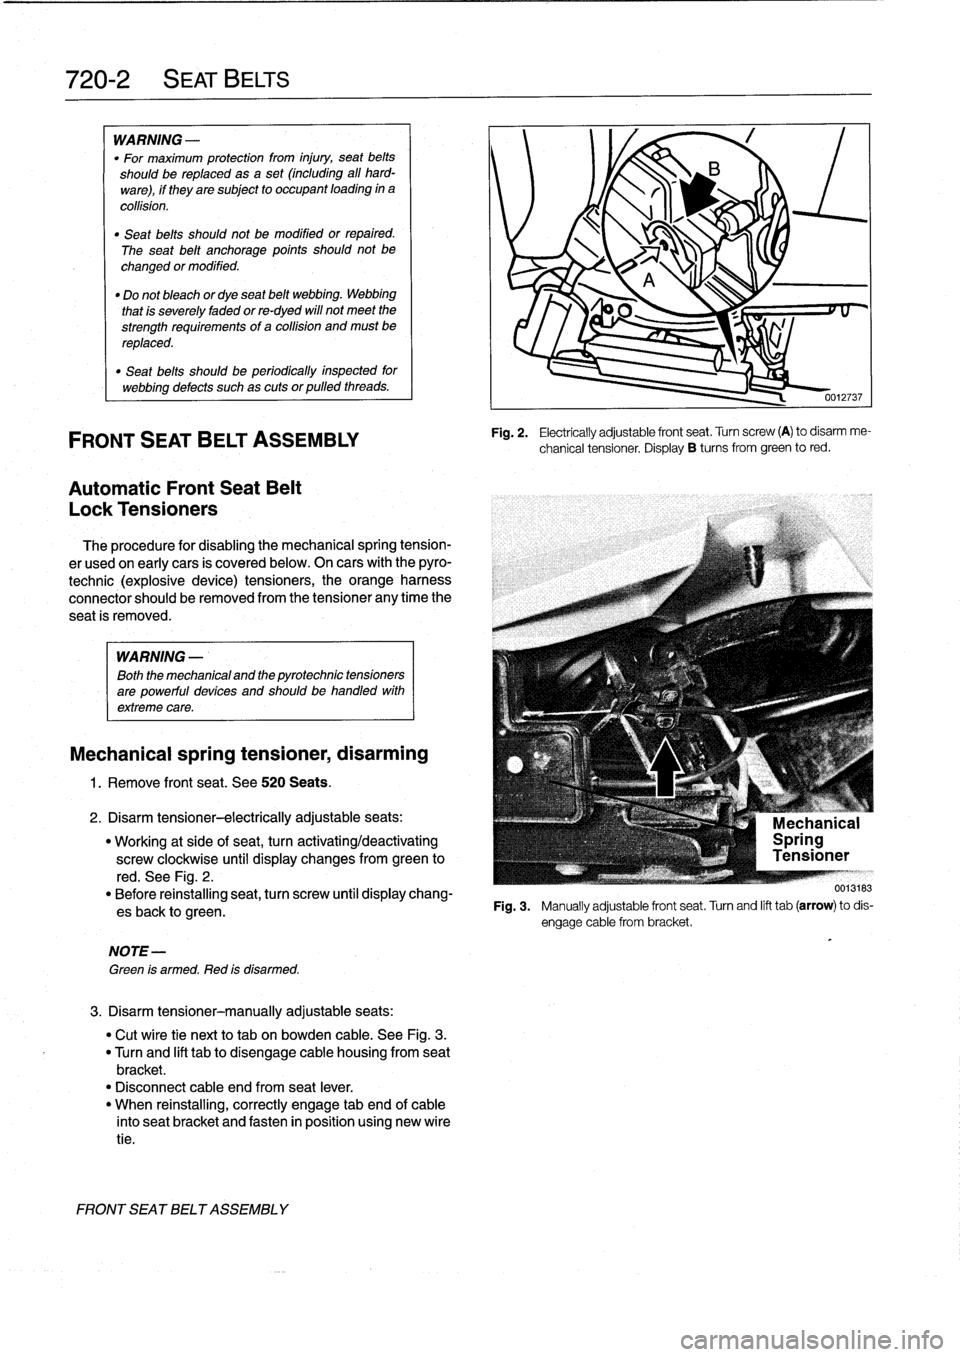 BMW M3 1996 E36 Workshop Manual 
720-2

	

SEAT
BELTS

WARNING
-

"
For
maximum
protection
from
injury,
seat
belts

should
be
replaced
as
a
set
(including
all
hard-

ware),
if
they
are
subject
to
occupant
loading
in
a

collision
.
"